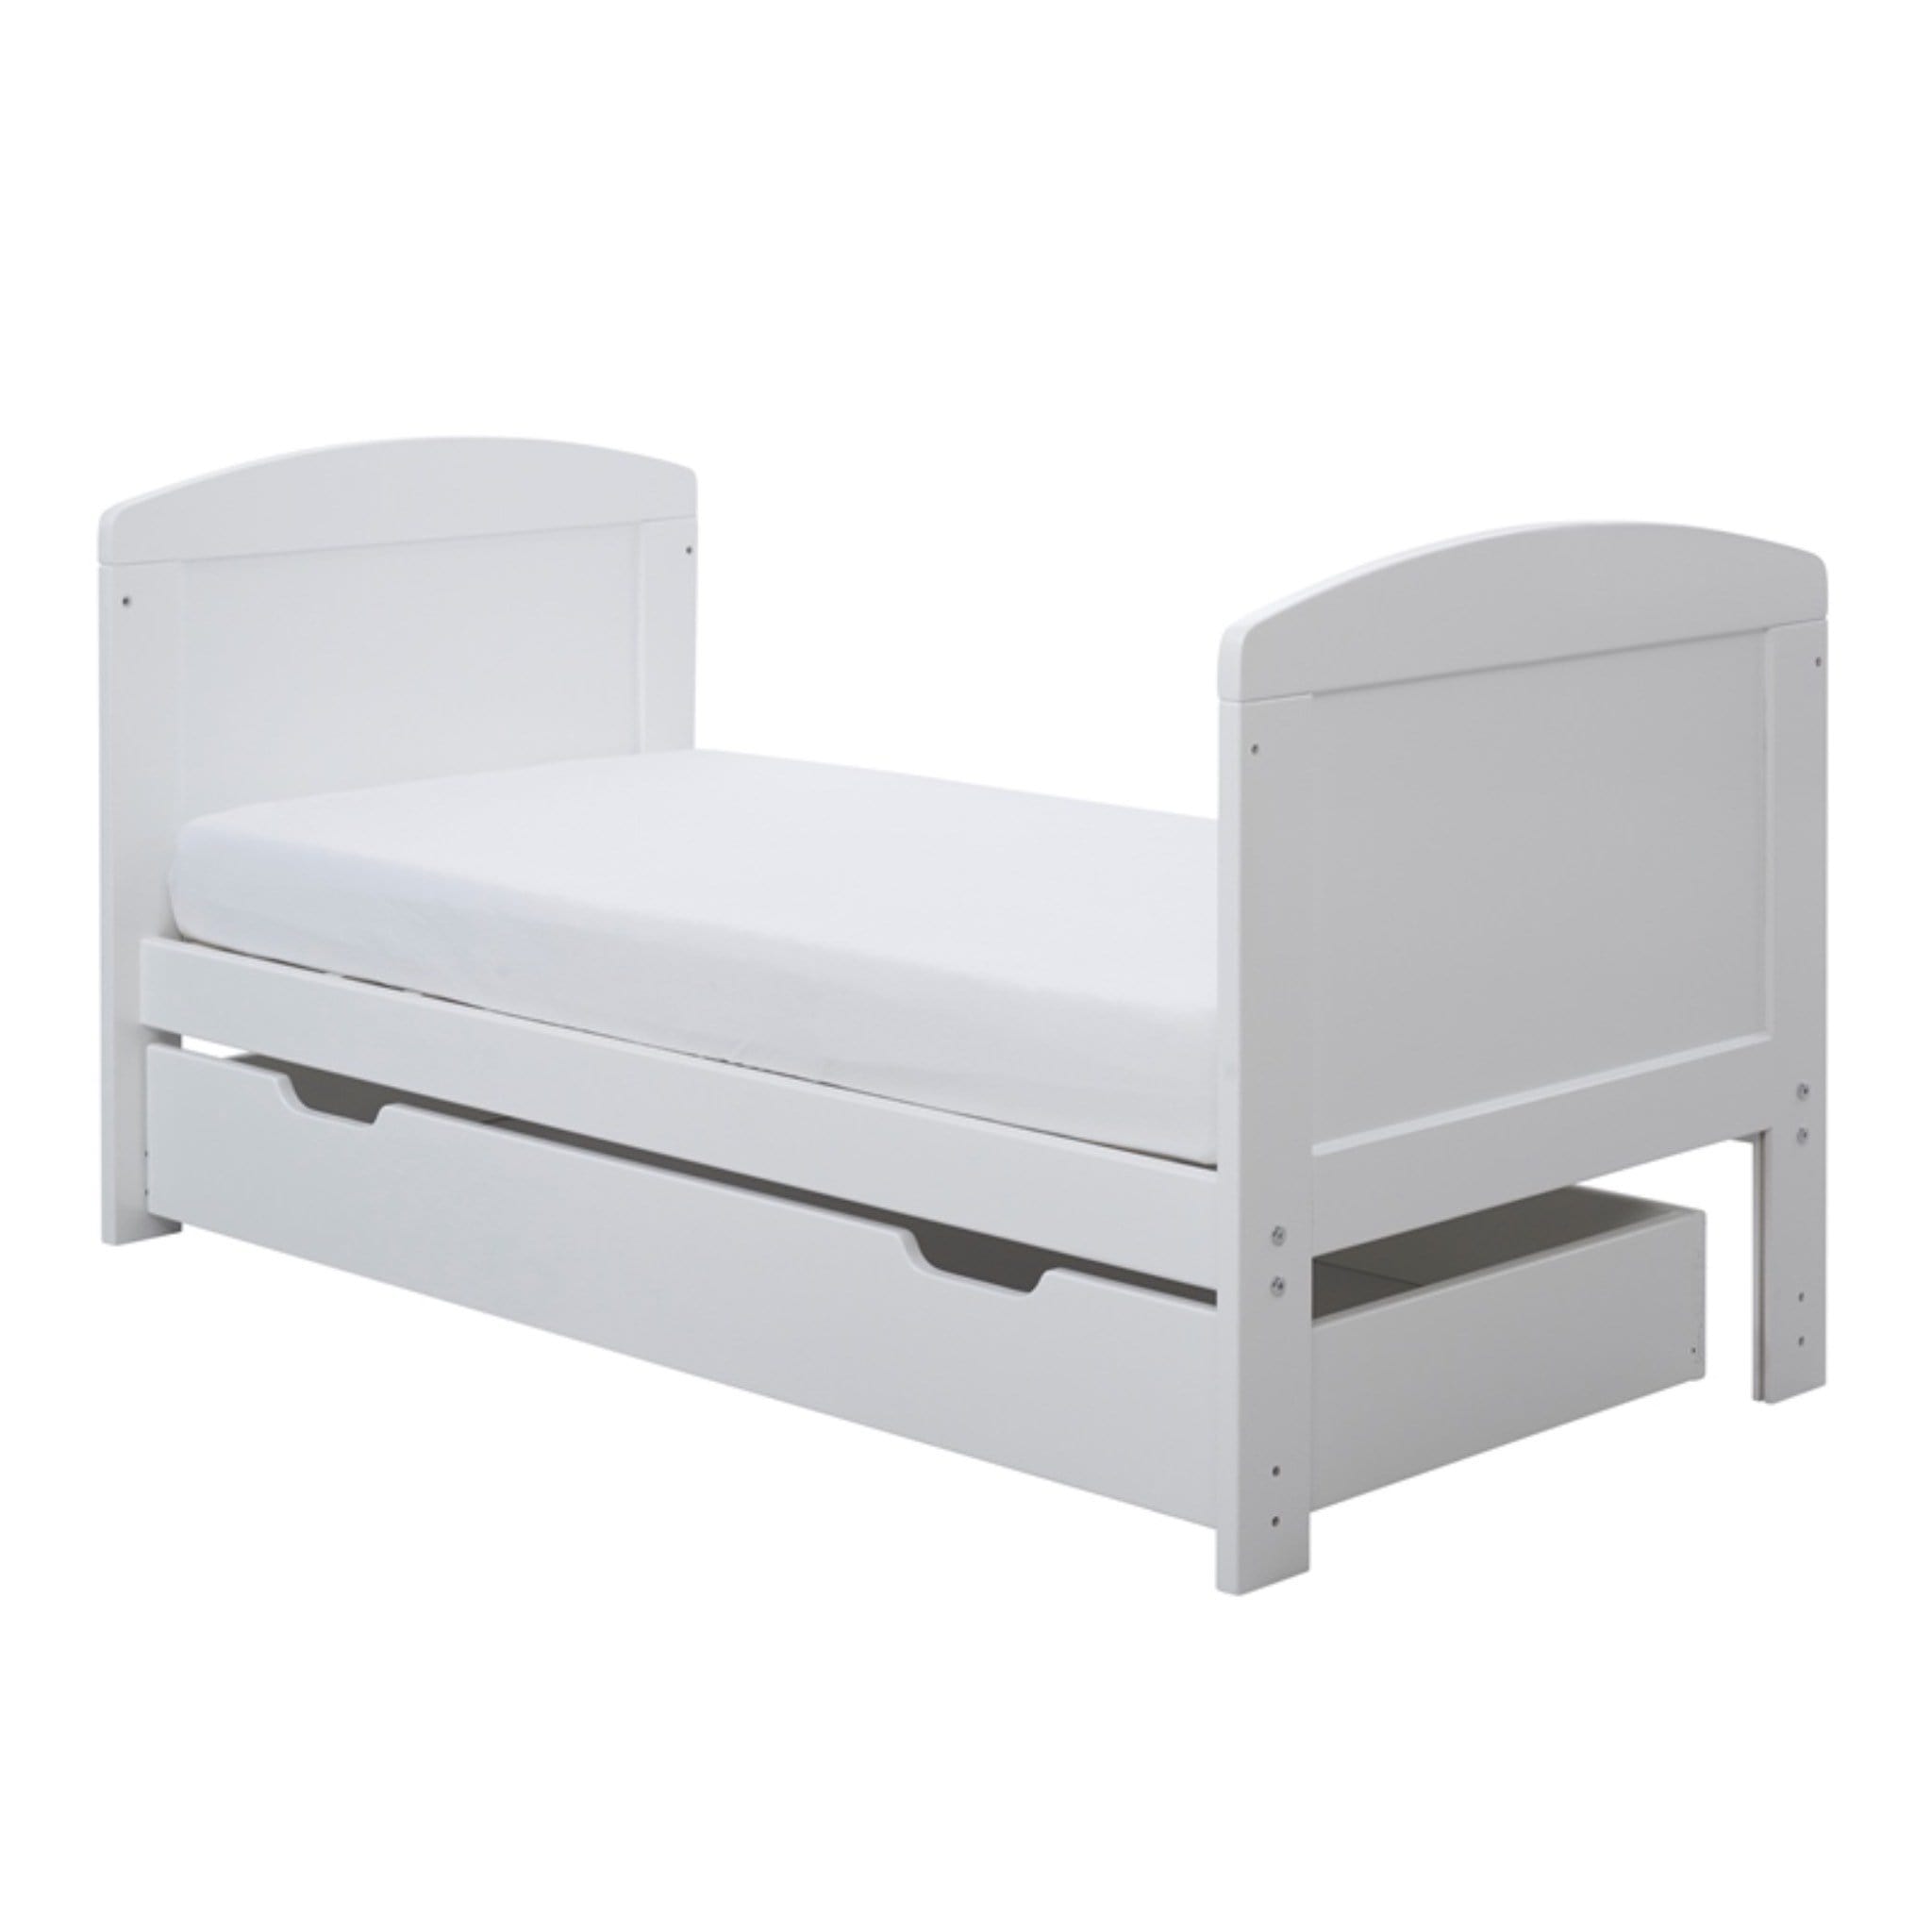 Ickle Bubba baby cot beds Ickle Bubba Coleby Mini 2 Piece Furniture & Under Drawer White